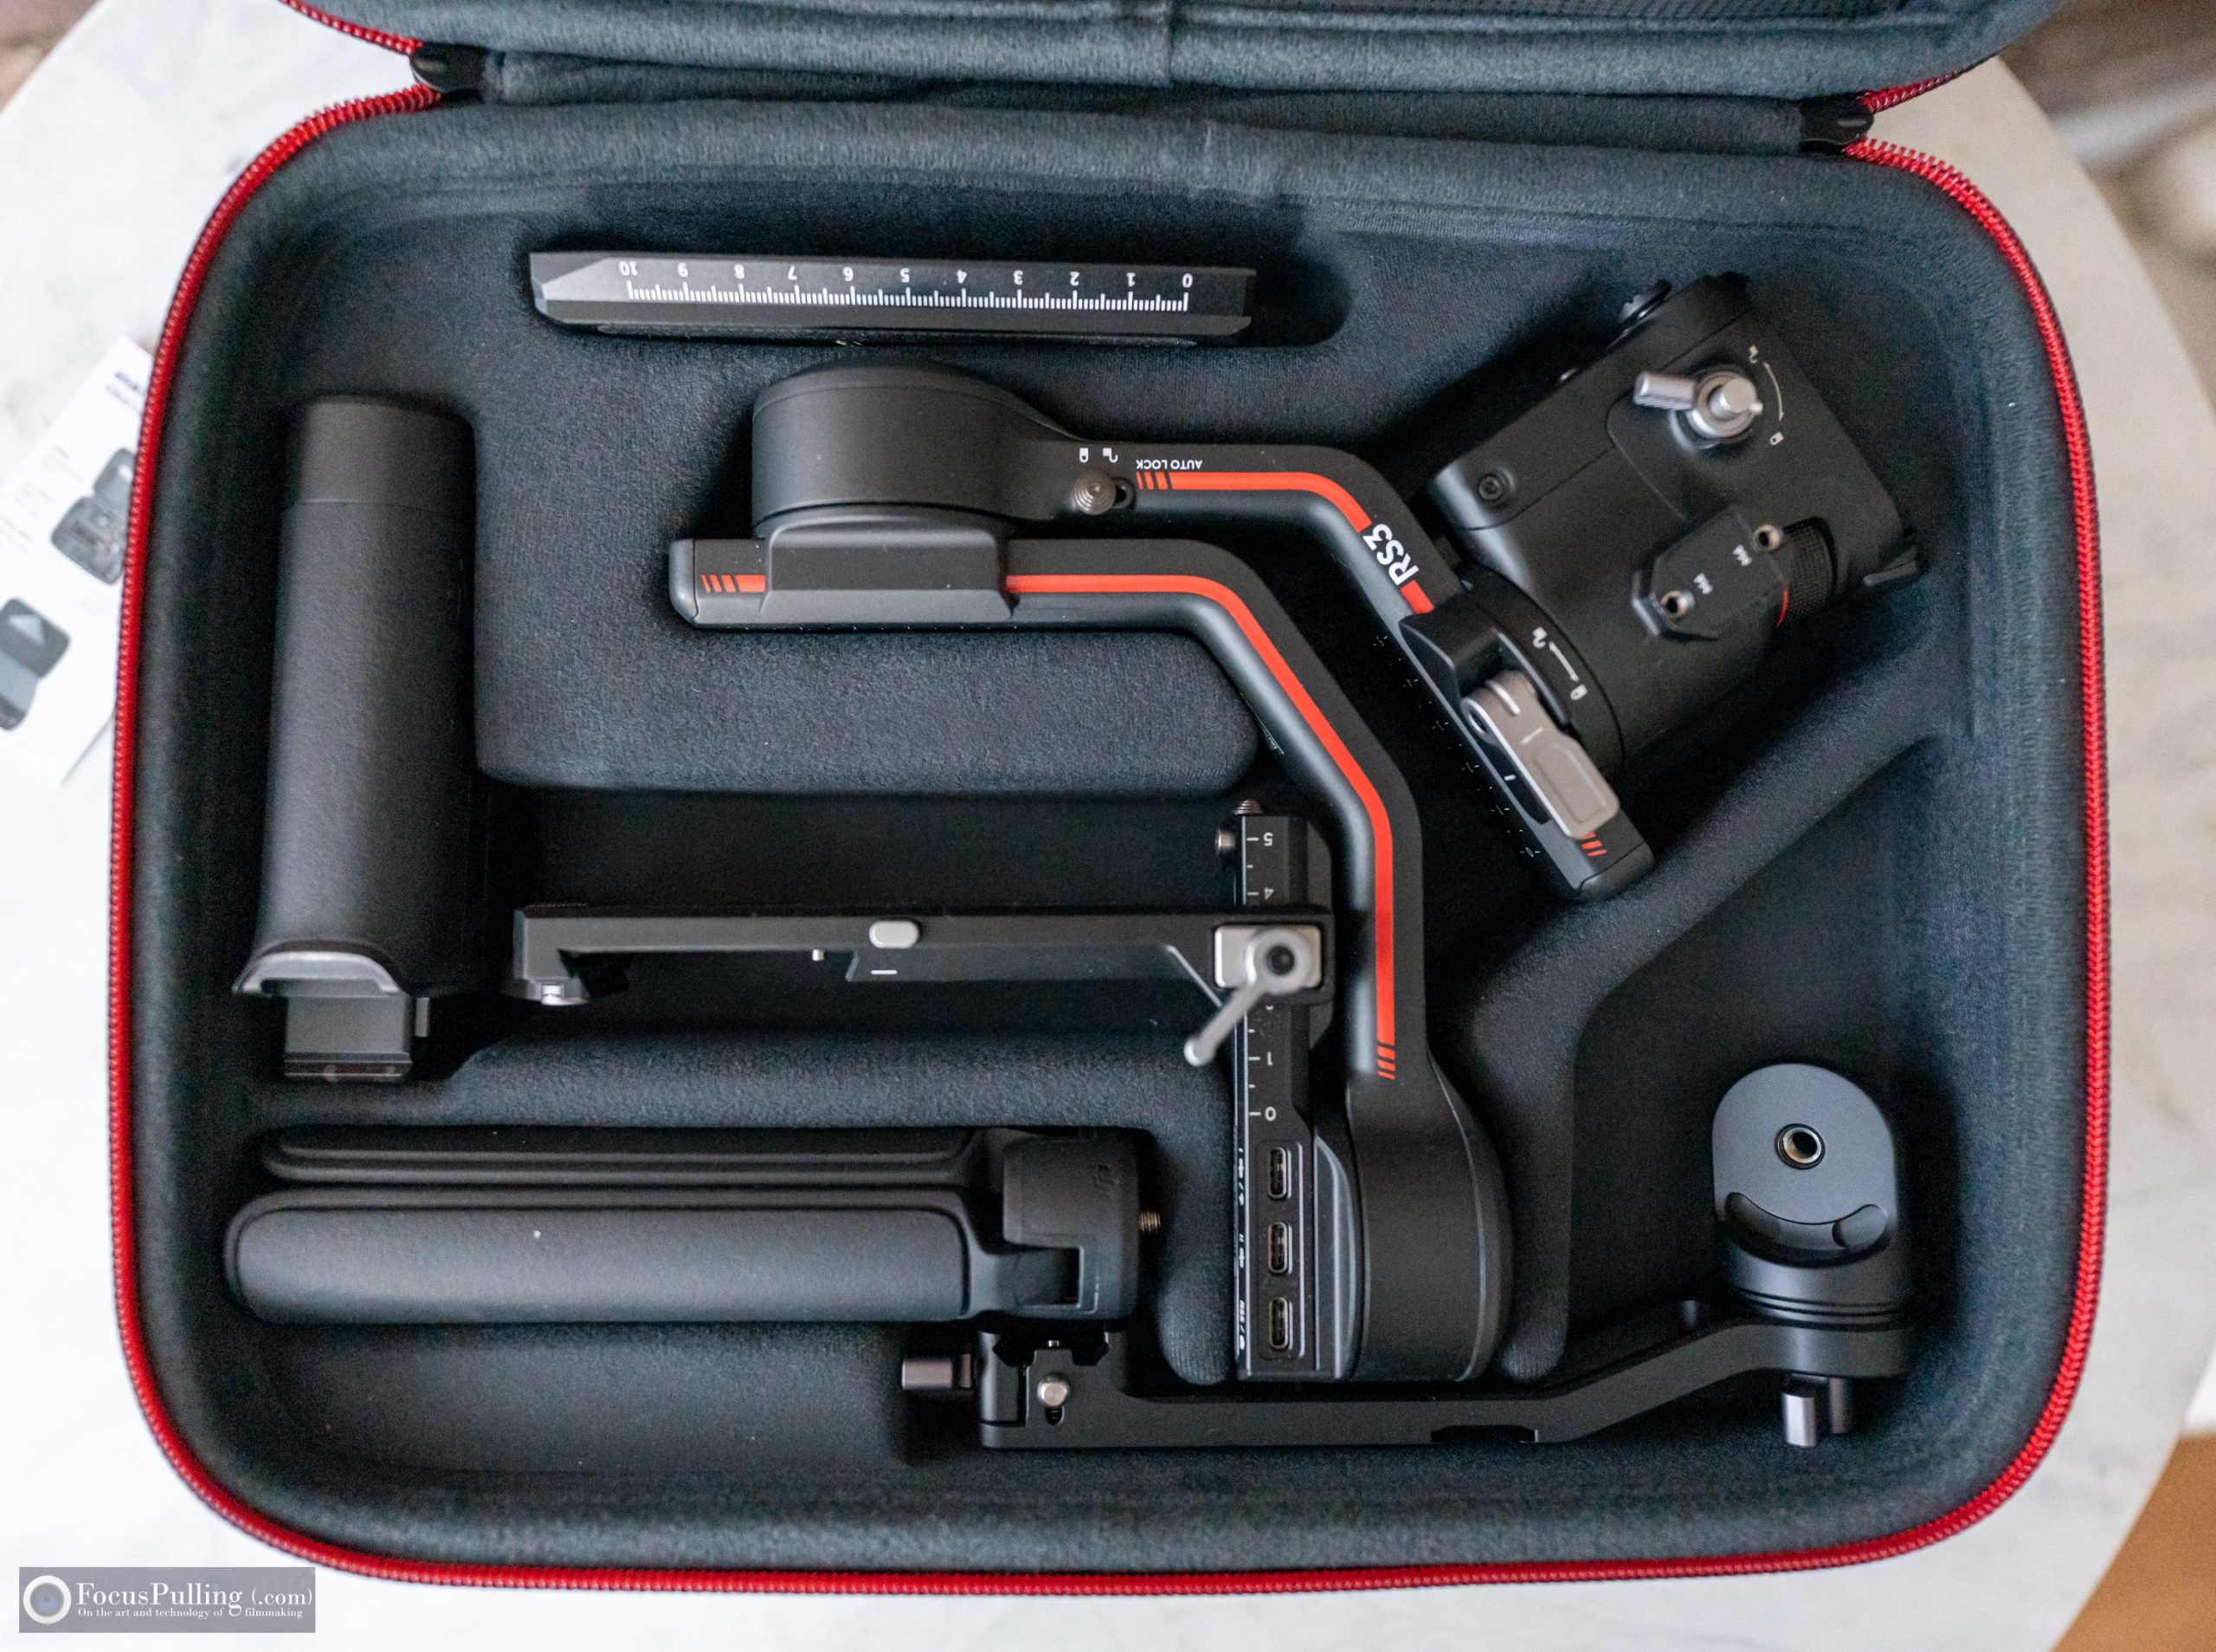 DJI RS 3: Essential accessories for the best all-around gimbal stabilizer -  FocusPulling